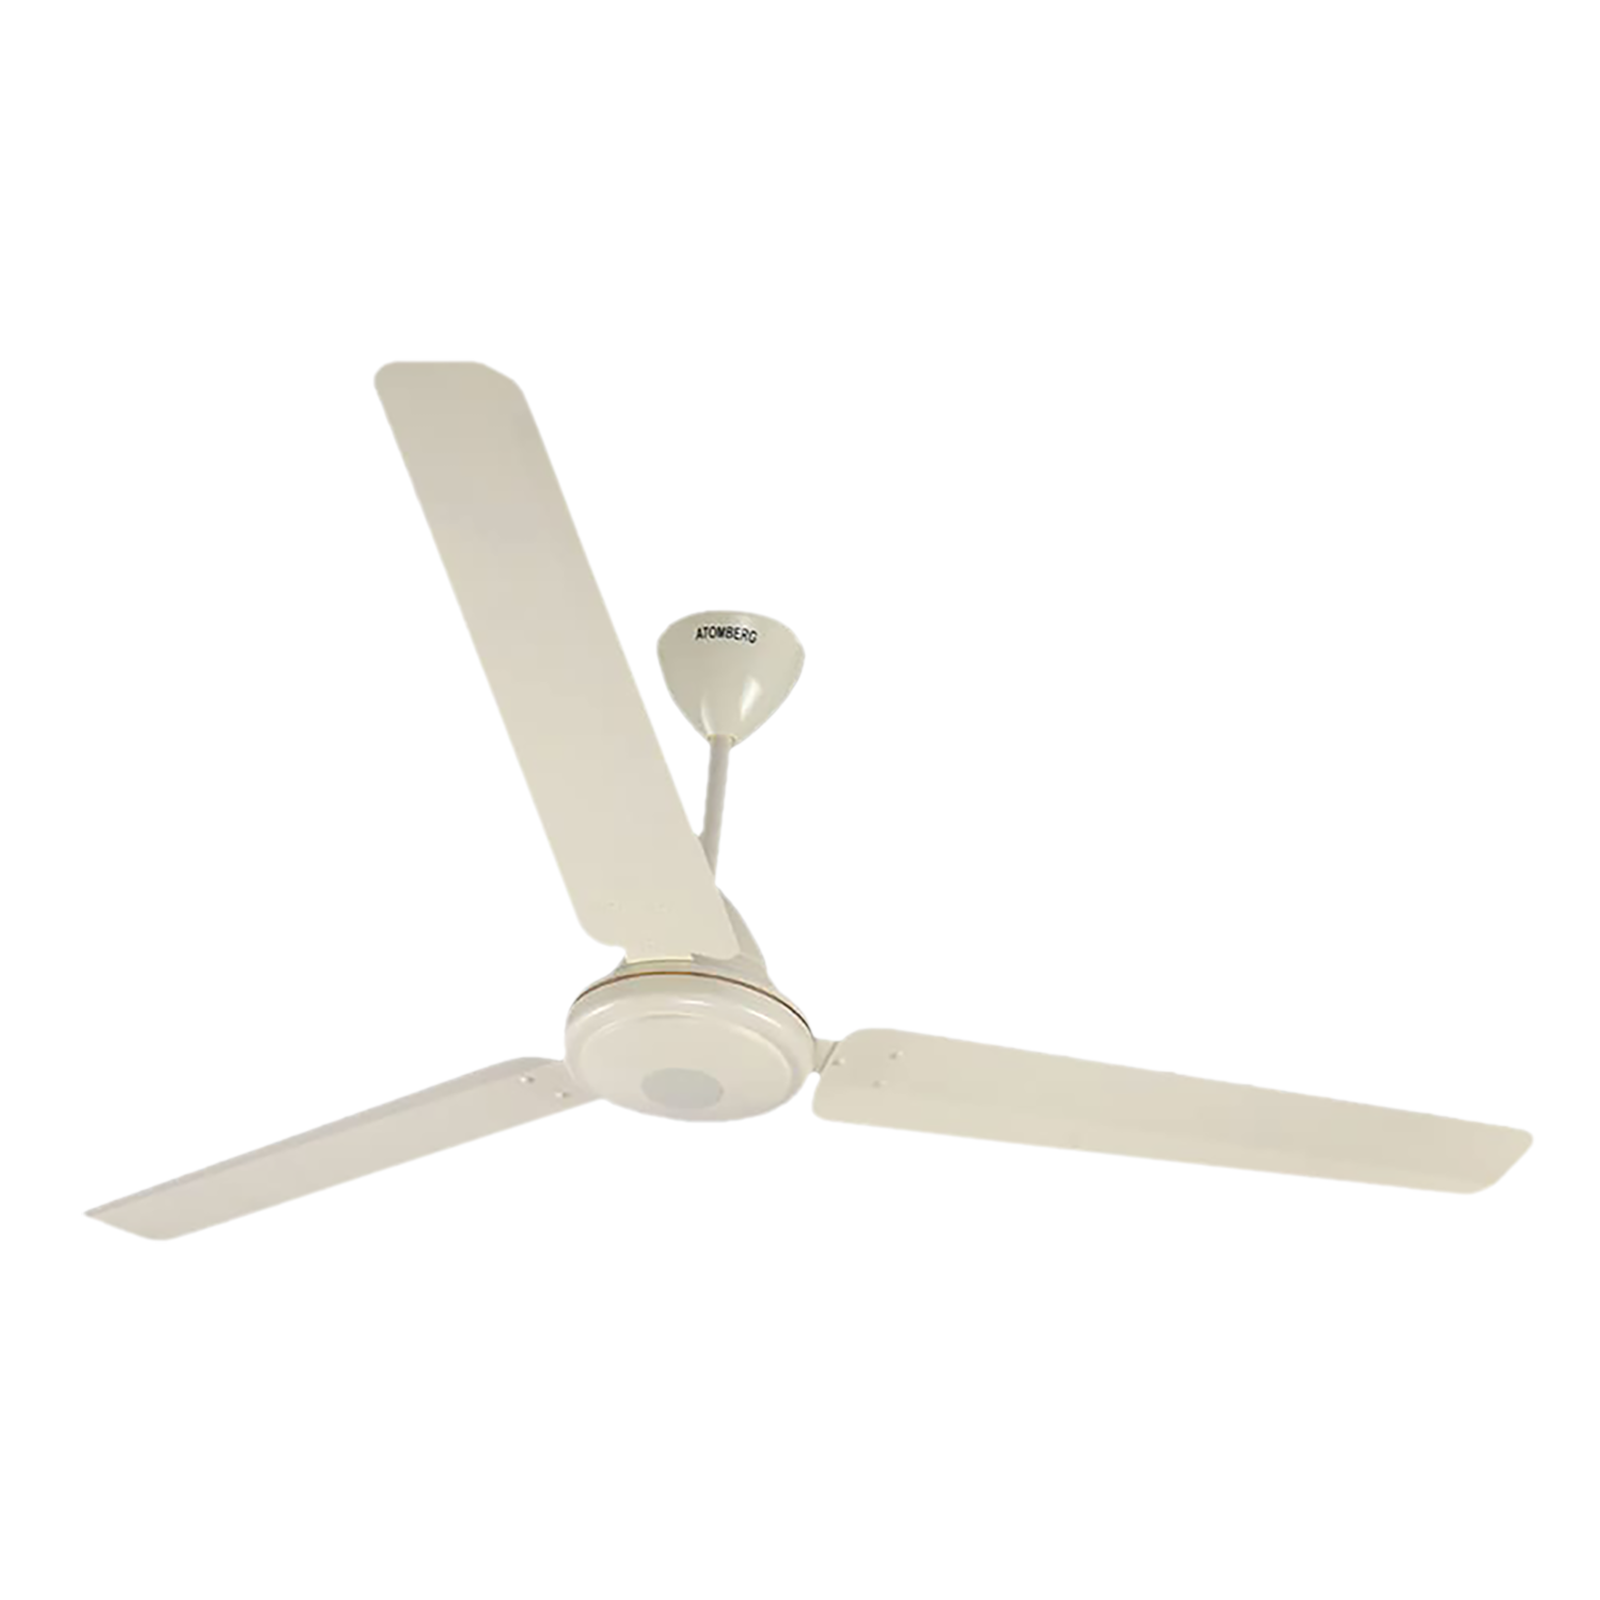 atomberg Efficio 5 Star 1400mm 3 Blade BLDC Motor Ceiling Fan with Remote (LED Indicator, Ivory)